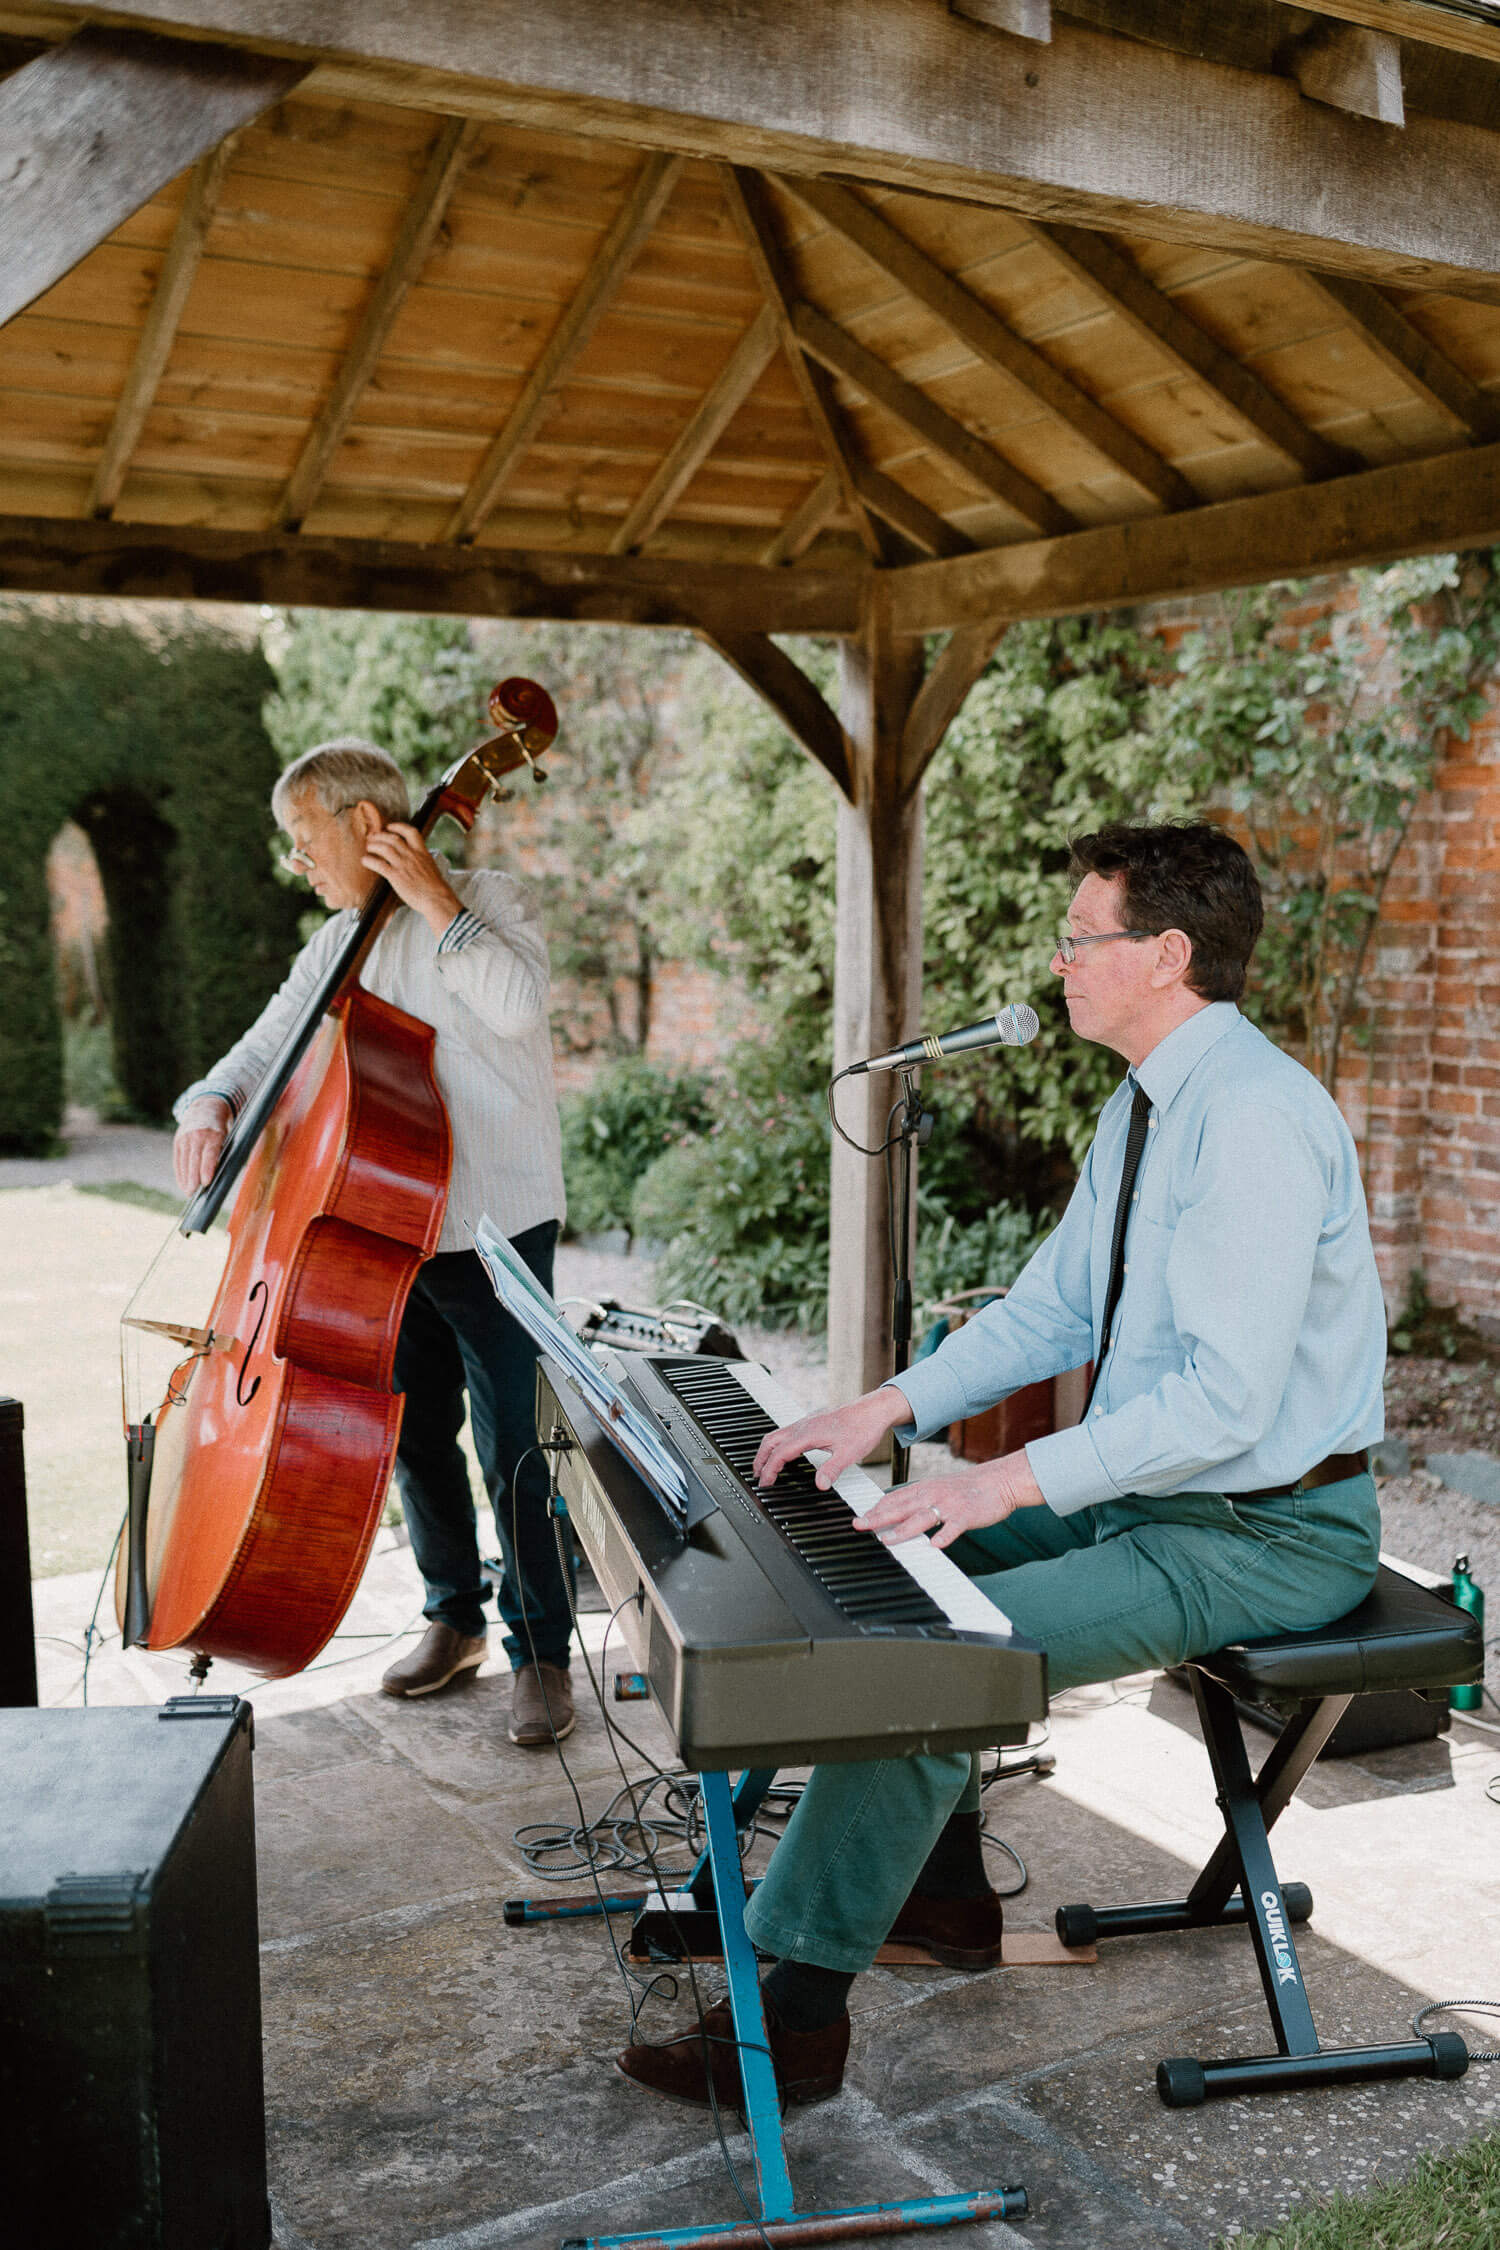 Musicians play the double bass and keyboard during reception drinks in the walled garden at Kingston Estate.